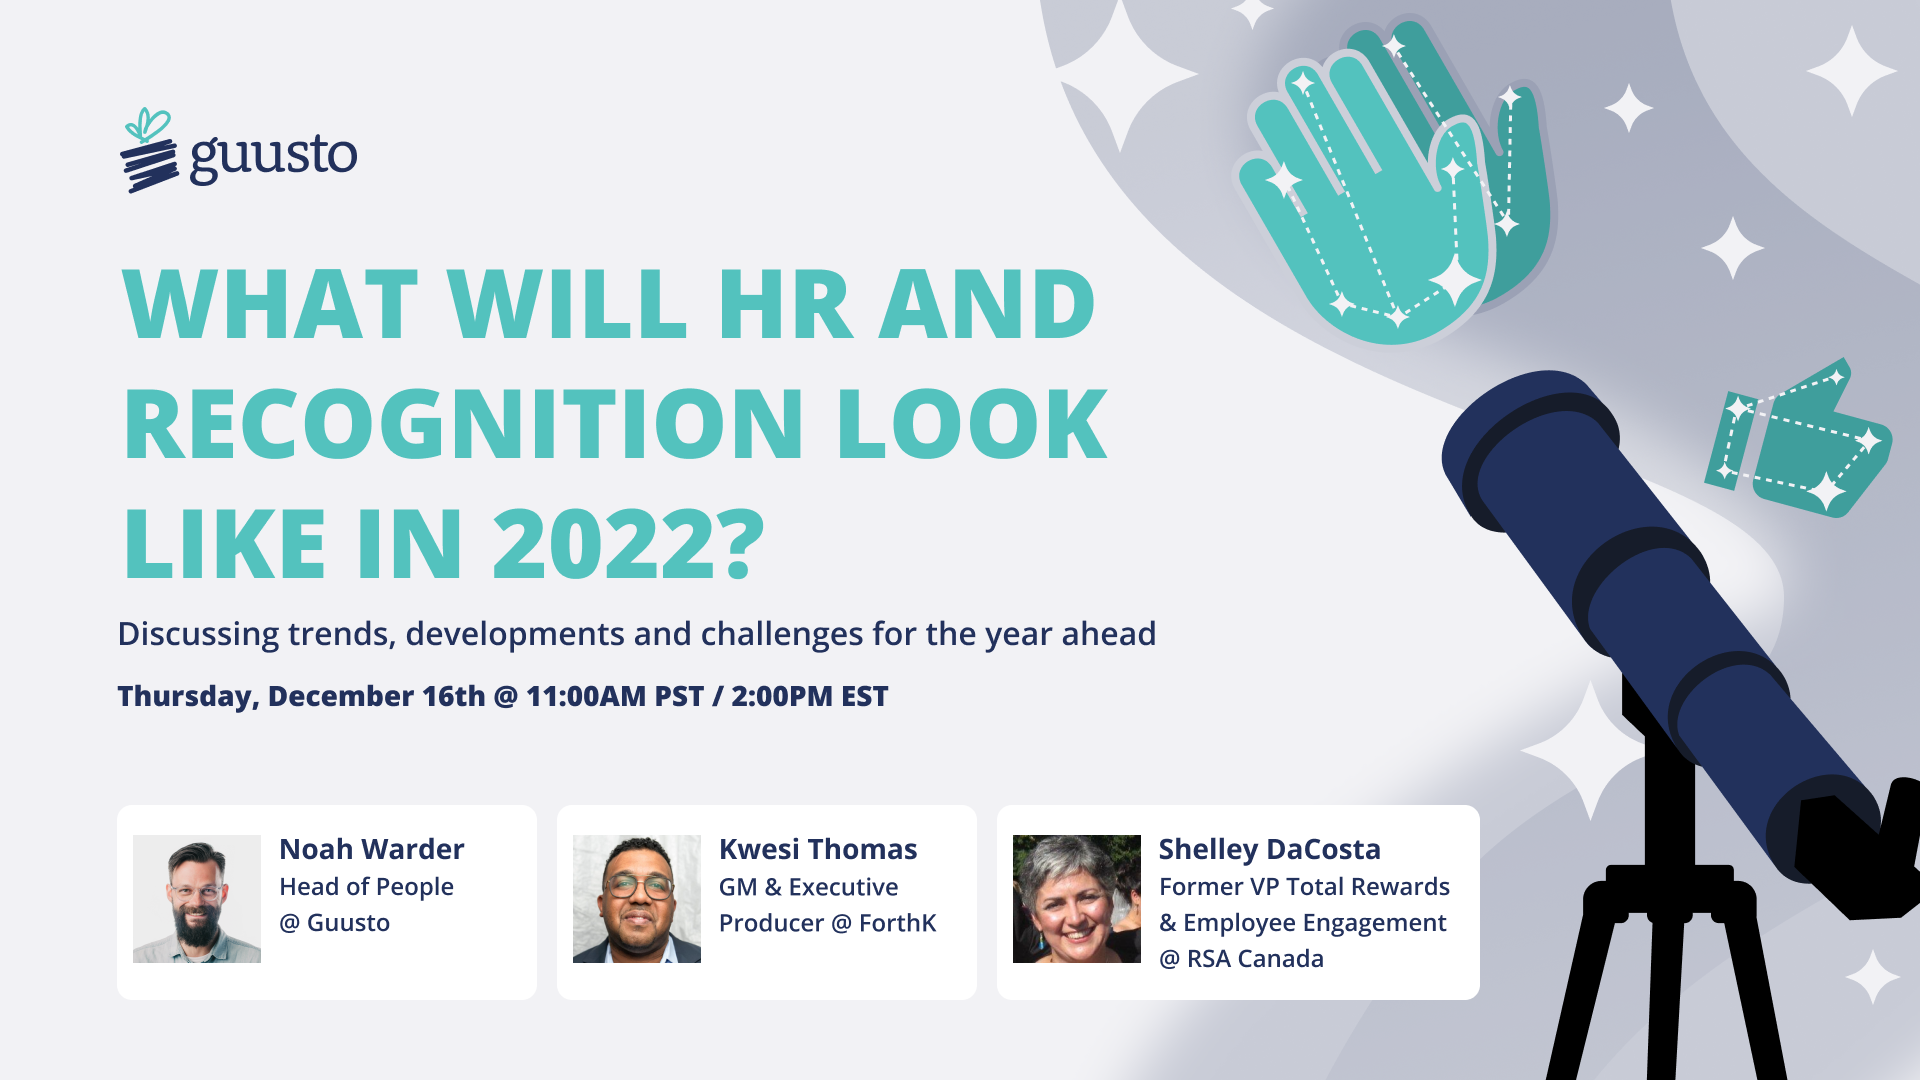 What Will HR and Recognition Look Like in 2022?